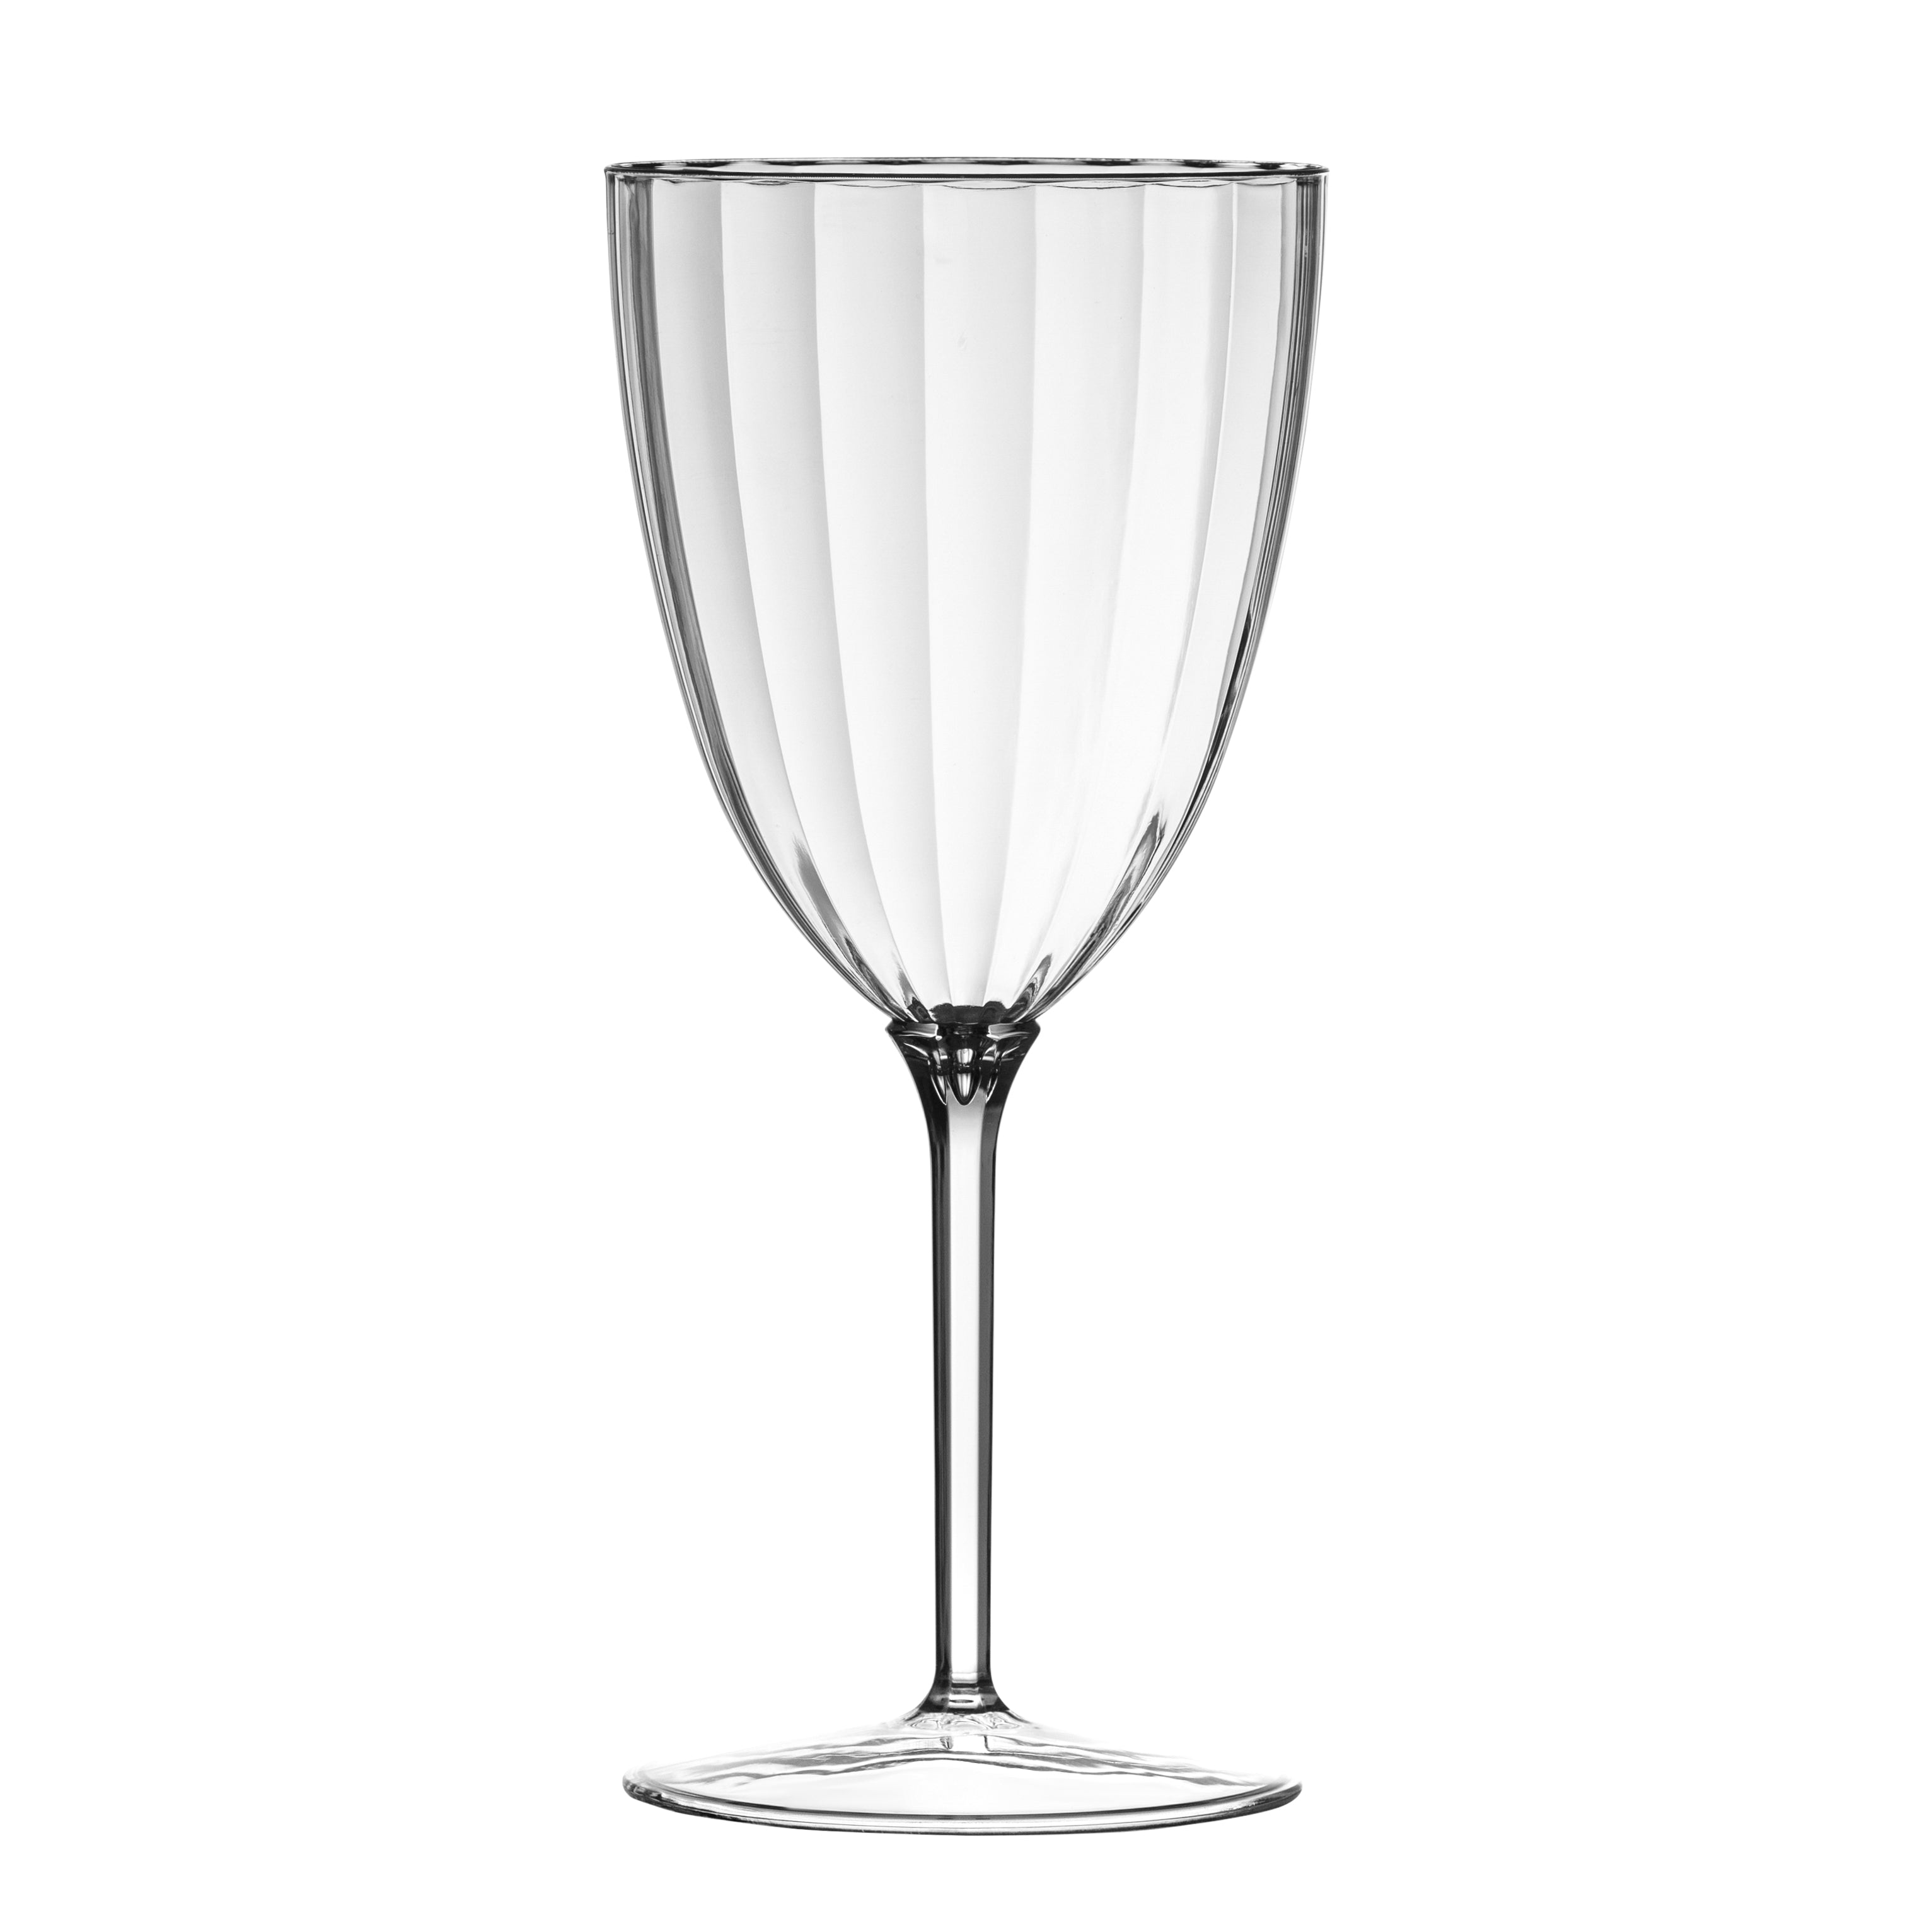 Set of 6 Crystal Drinking Glasses - 7oz, Clear Wine Glass 